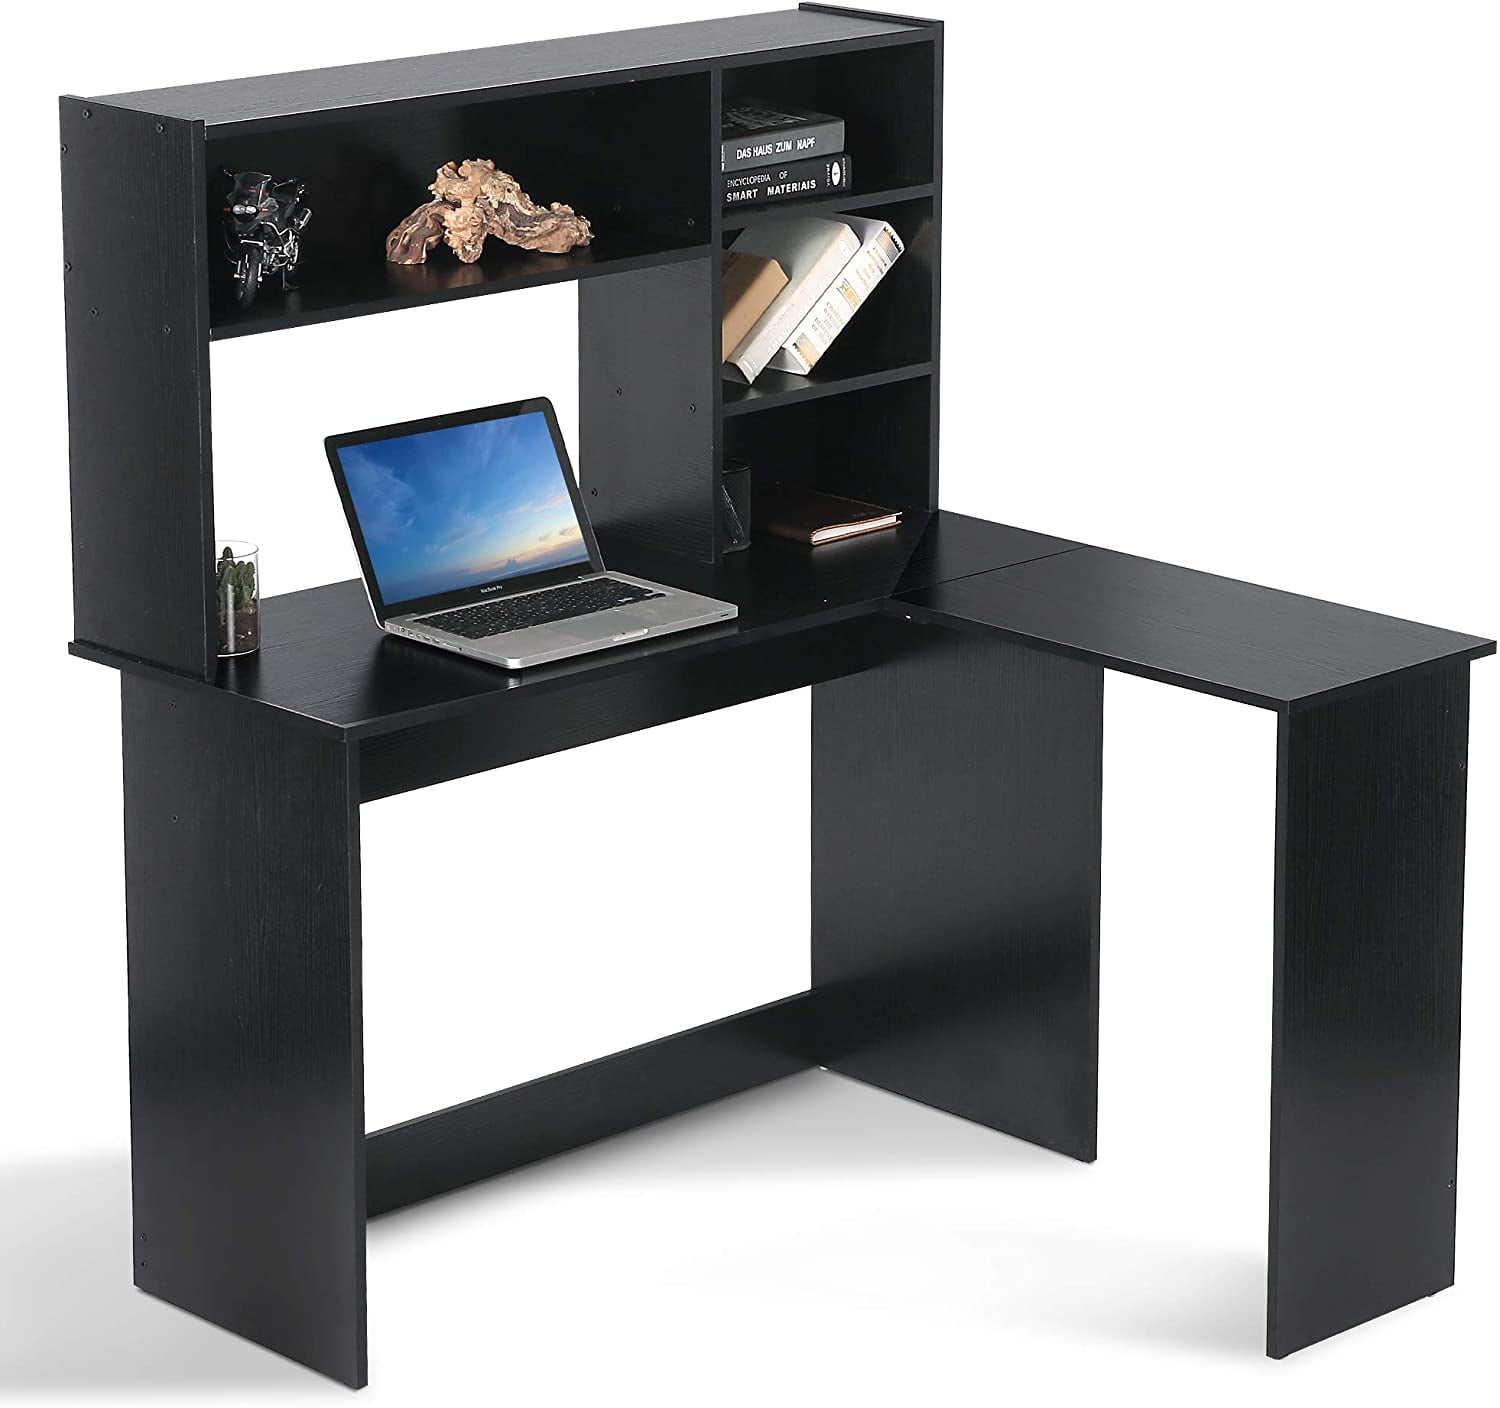 ivinta Computer Desk with Shelves, Office Desk for Living Room,Small Desk  with Storage Space, Home Office Desks, Vanity Desk with Gold Legs PC Laptop